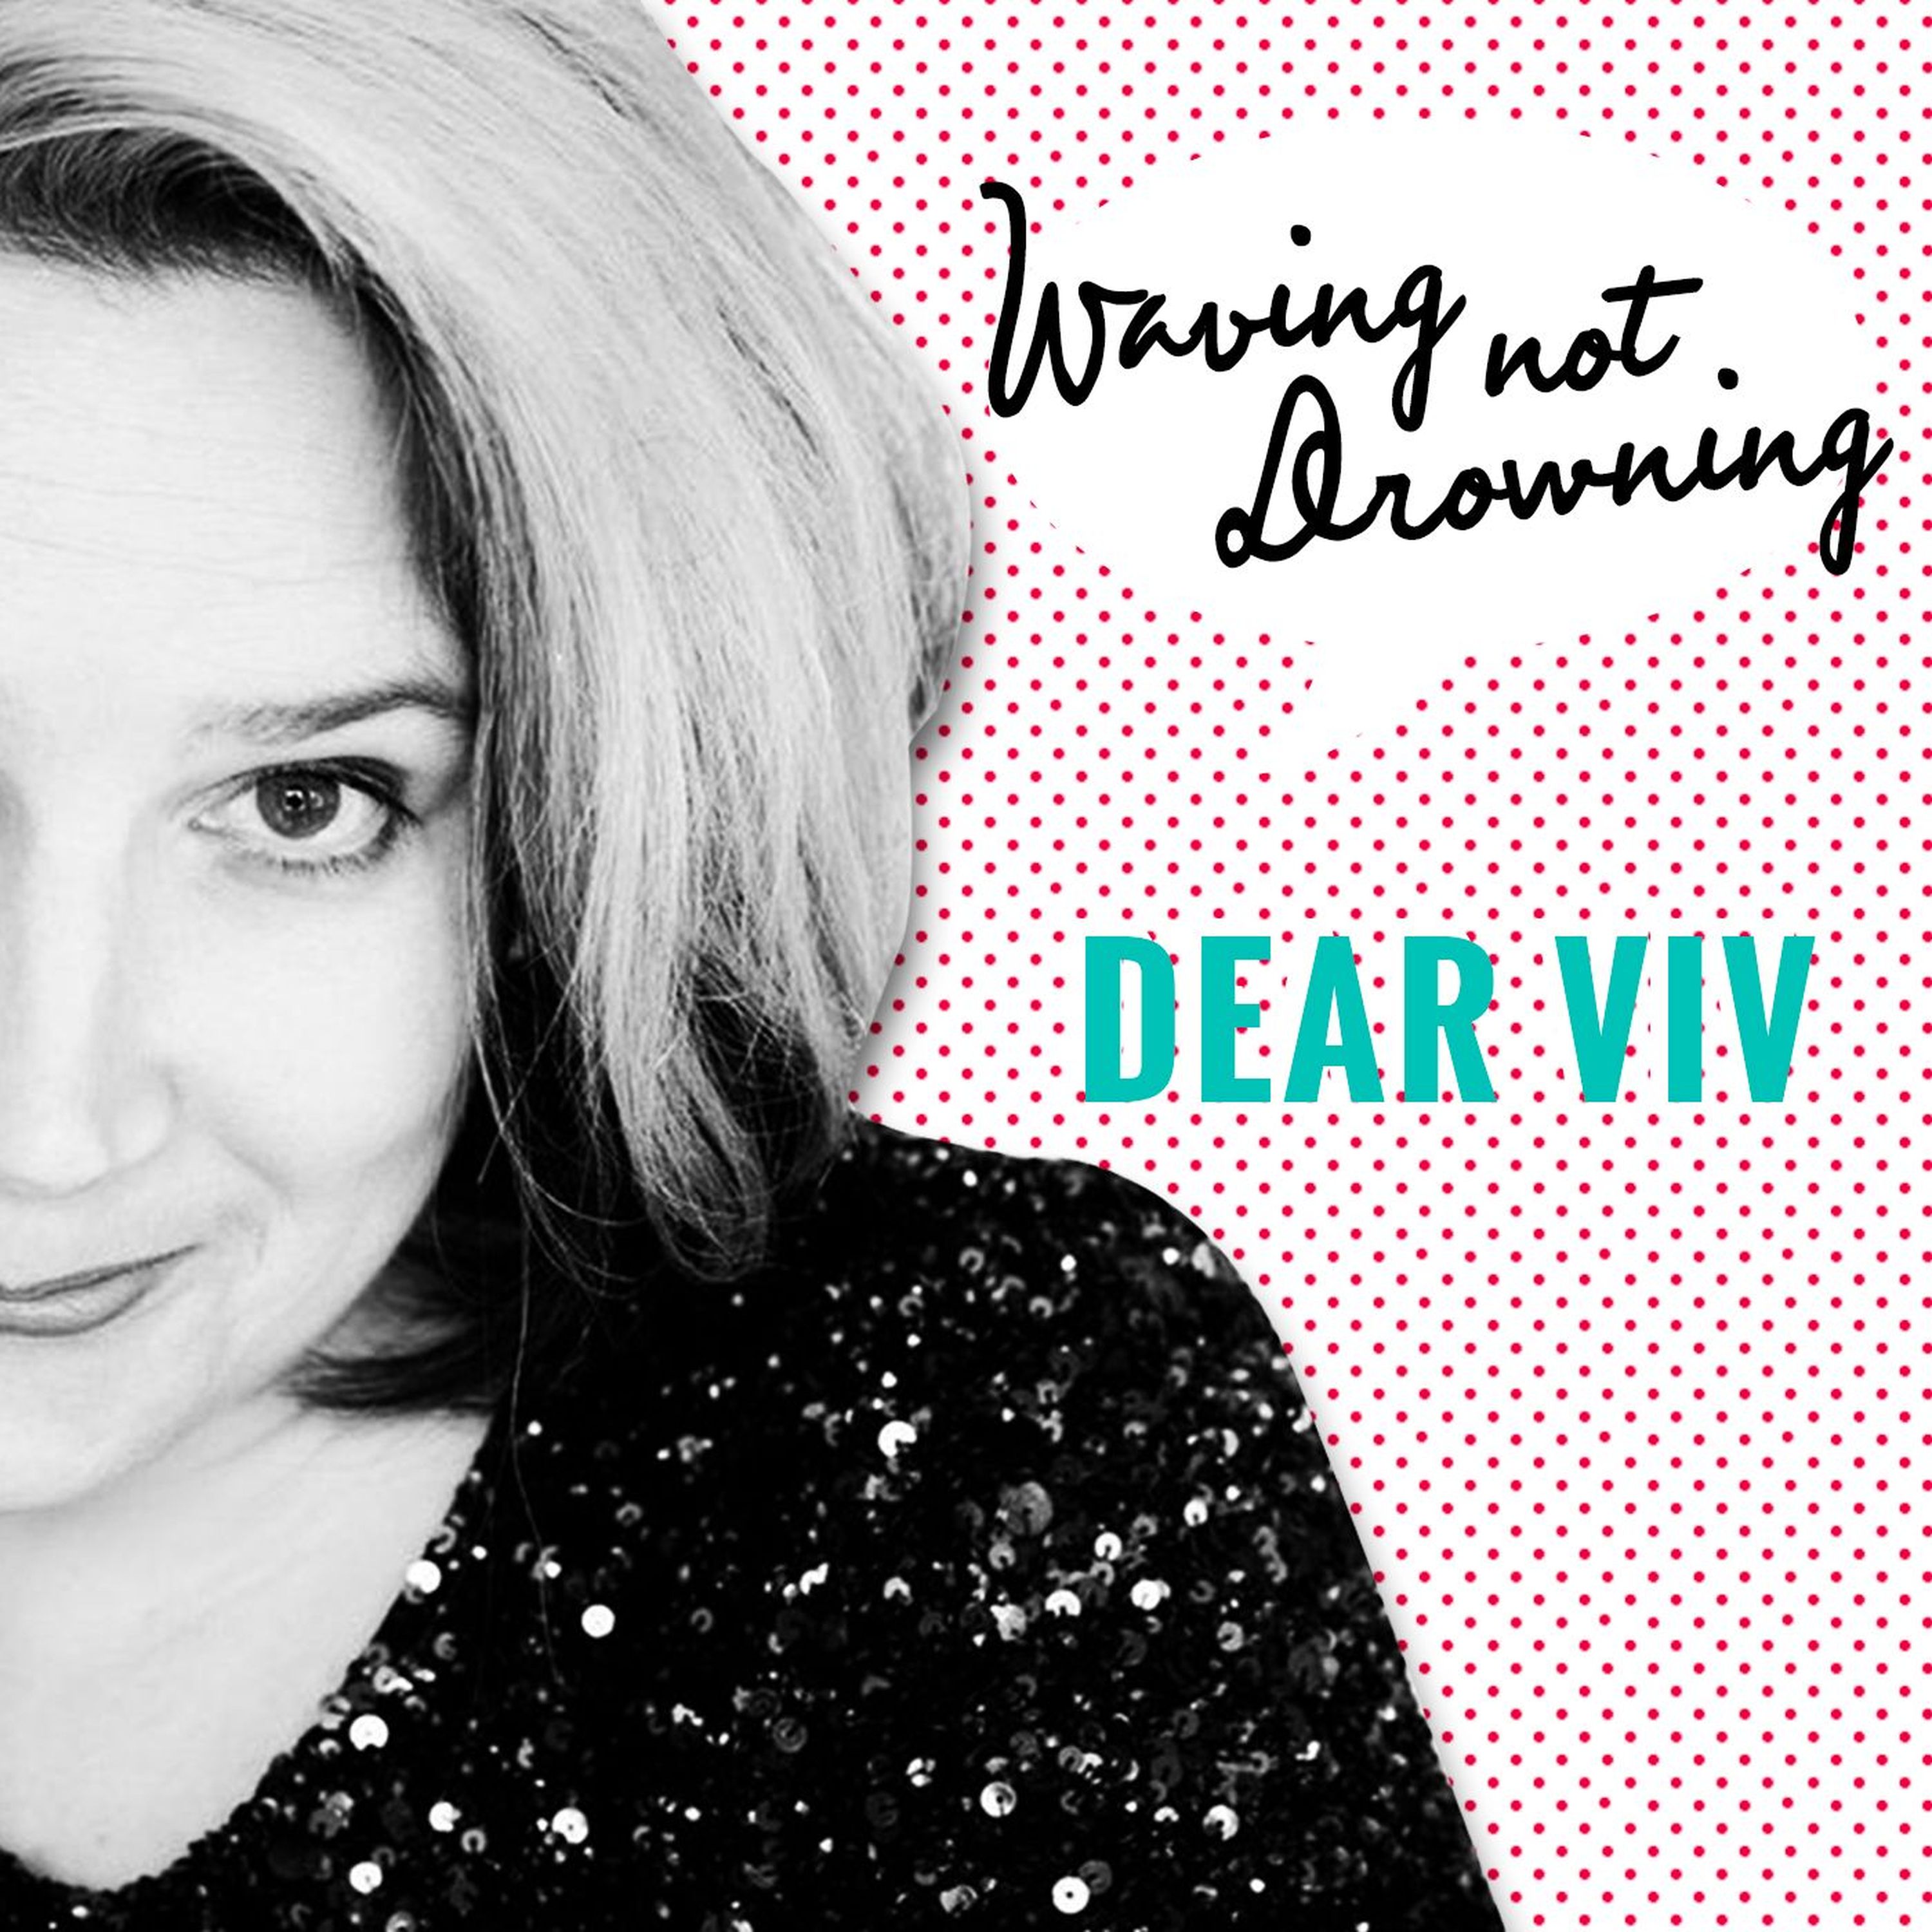 Dear Viv: I'm in a bad way after leaving an abusive relationship